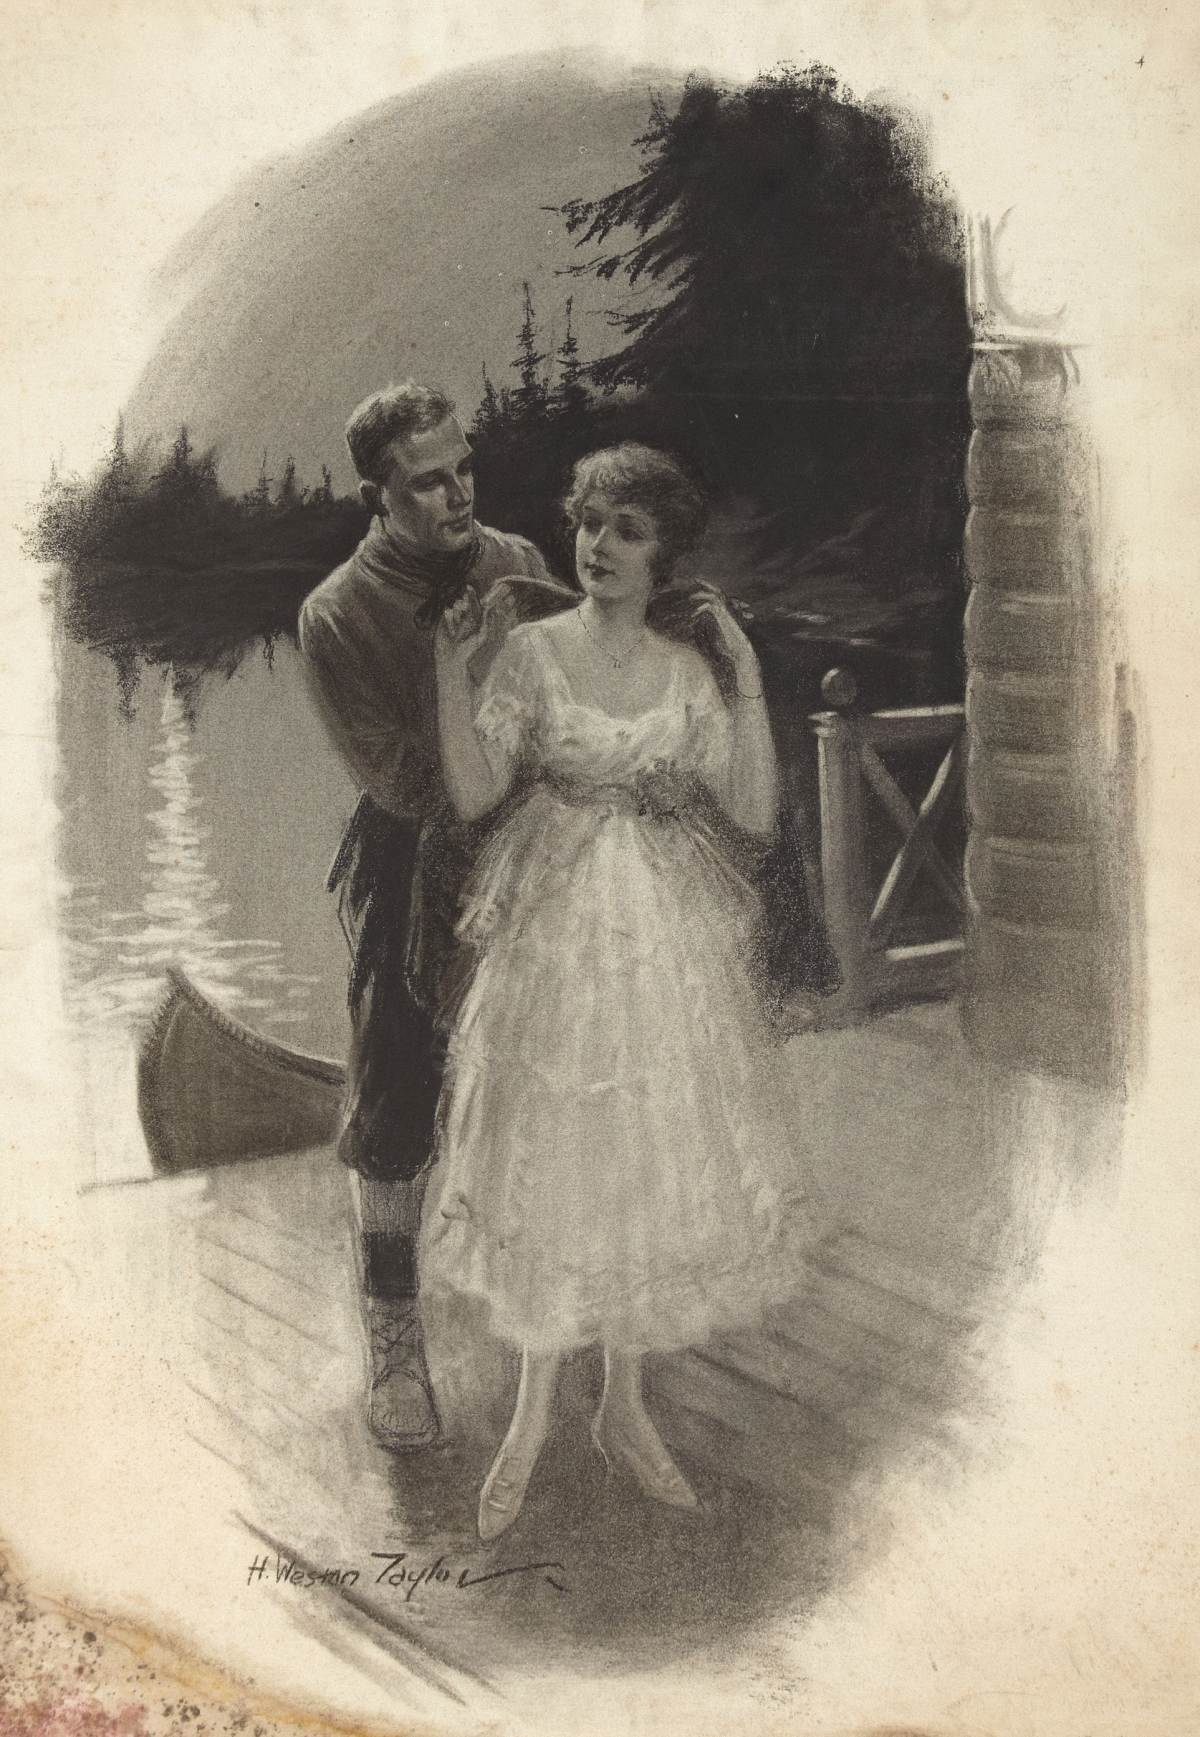 Couple At The Lake, Illustration by Horace Weston Taylor